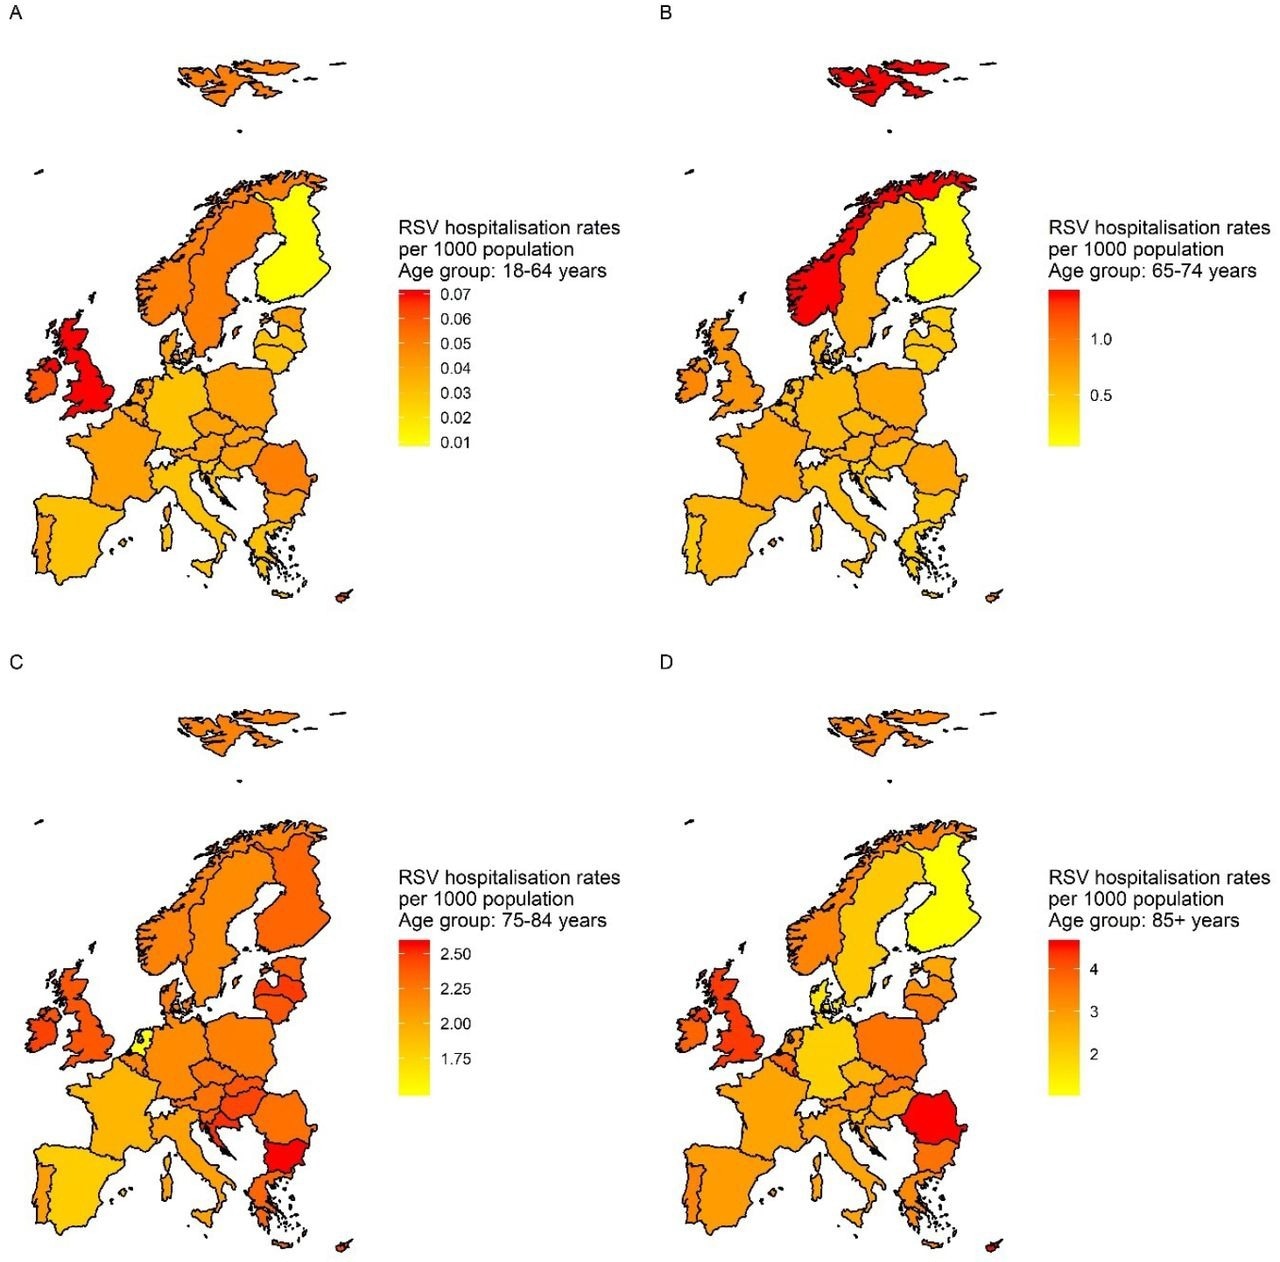 RSV-associated hospitalization rates per 1000 population in 28 EU countries and Norway. A: RSV-associated hospitalization rates per 1 000 in adults aged 18-64 years. B: RSV-associated hospitalization rates per 1 000 in adults aged 65-74 years. C: RSV-associated hospitalization rates per 1 000 in adults aged 75-84 years. D: RSV-associated hospitalization rates per 1 000 in adults aged ≥85 years.